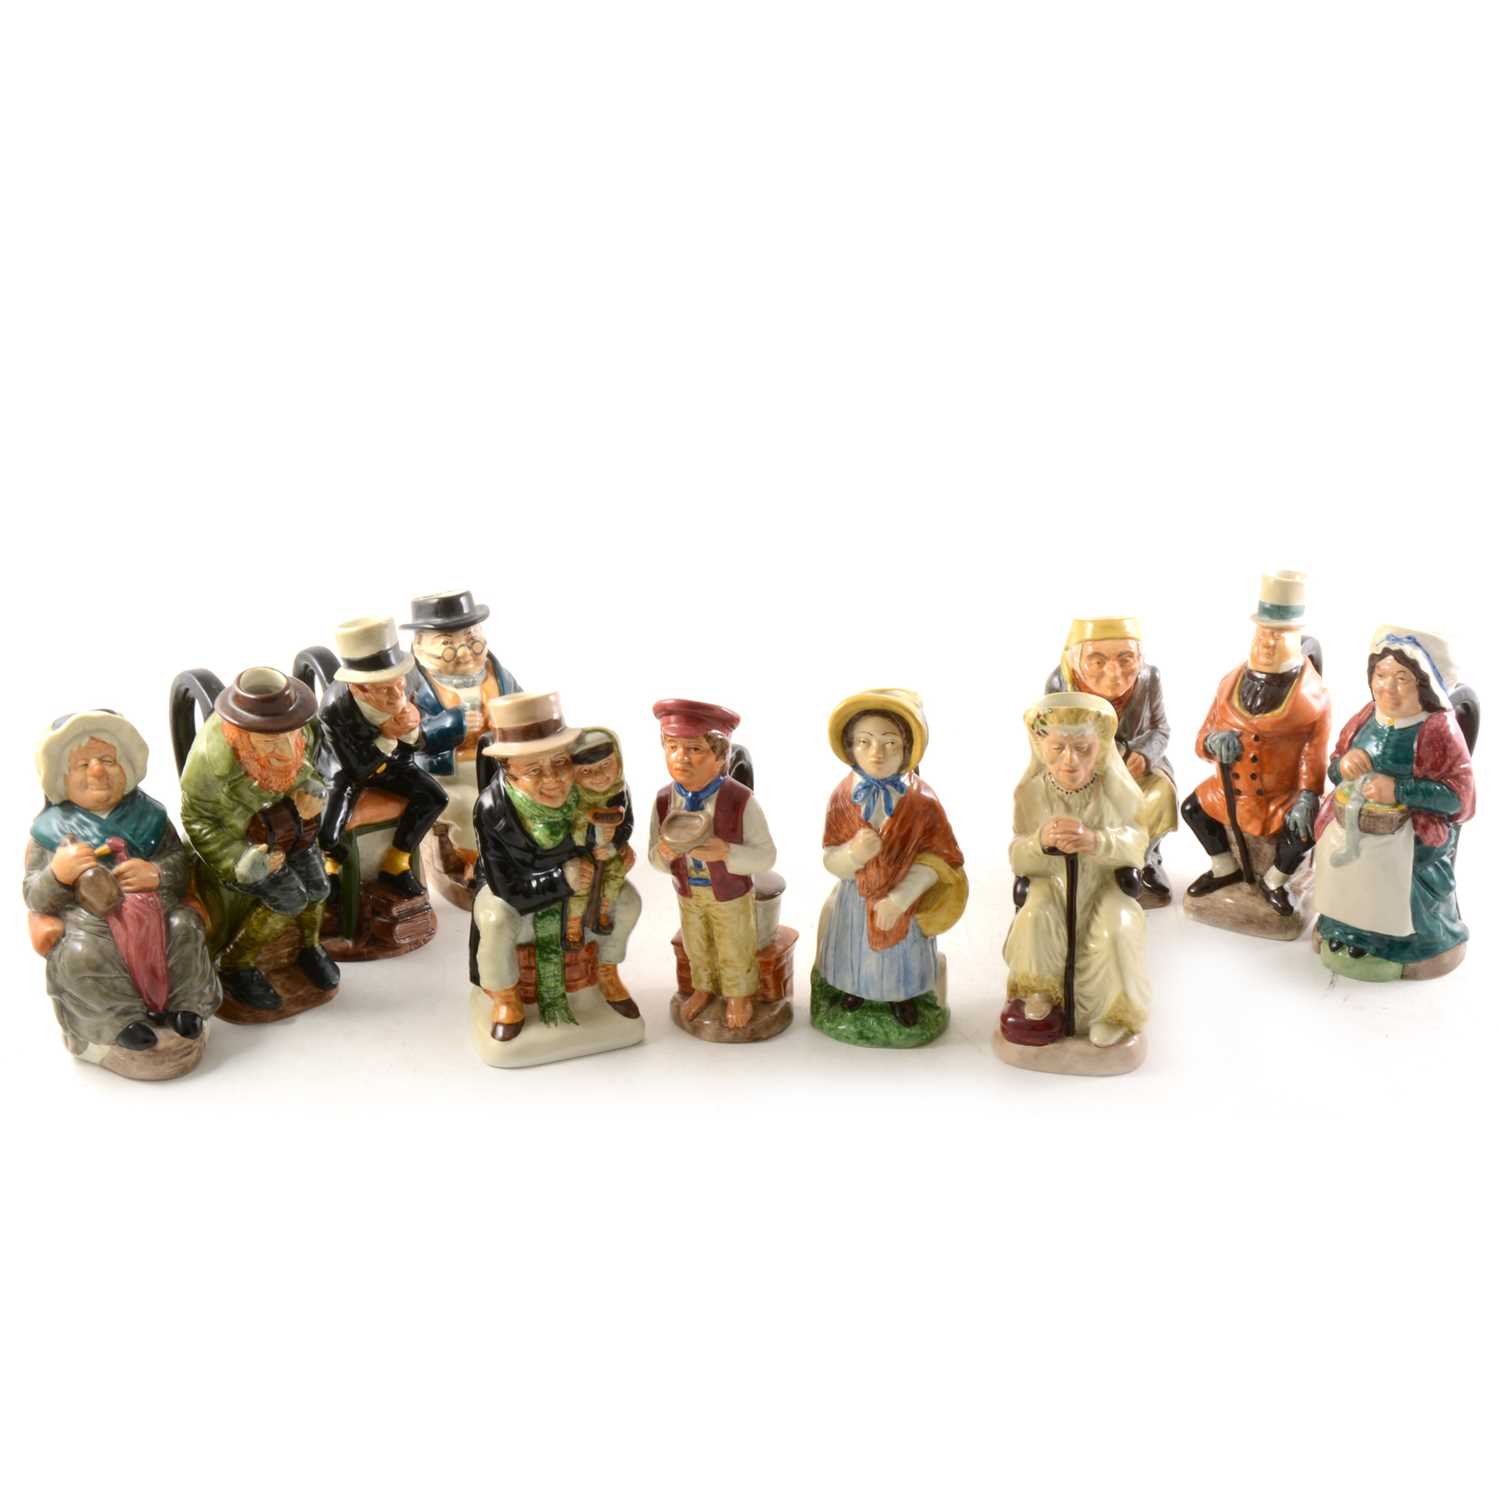 Lot 84 - Eleven jugs from The Charles Dickens Toby Jug Collection, by Wood & Sons